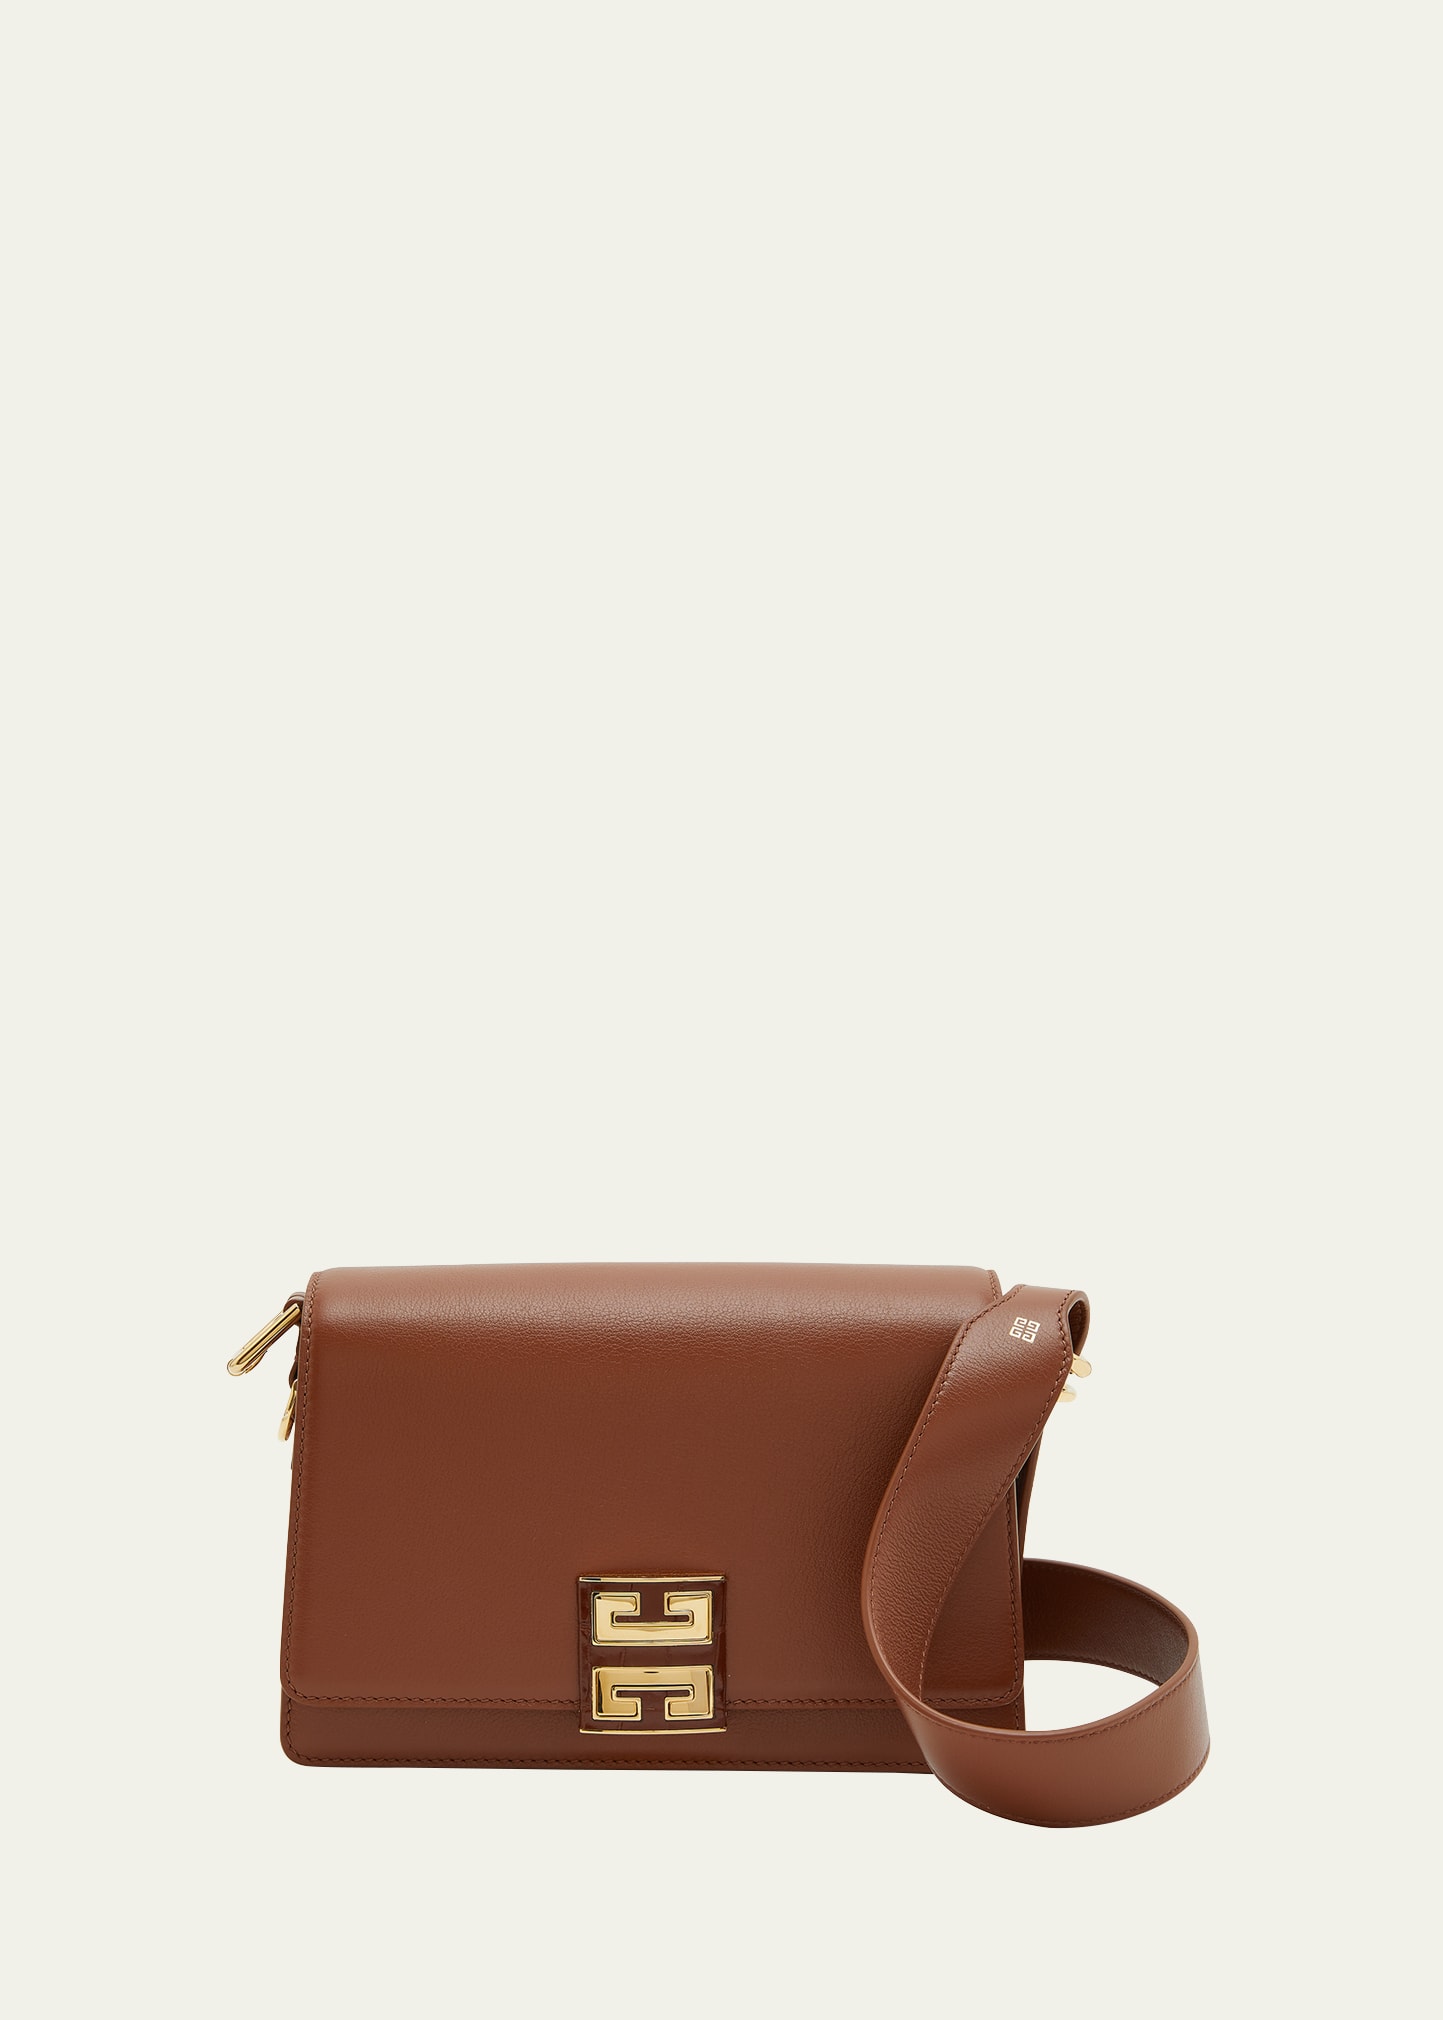 4G Flap Crossbody Bag in Leather